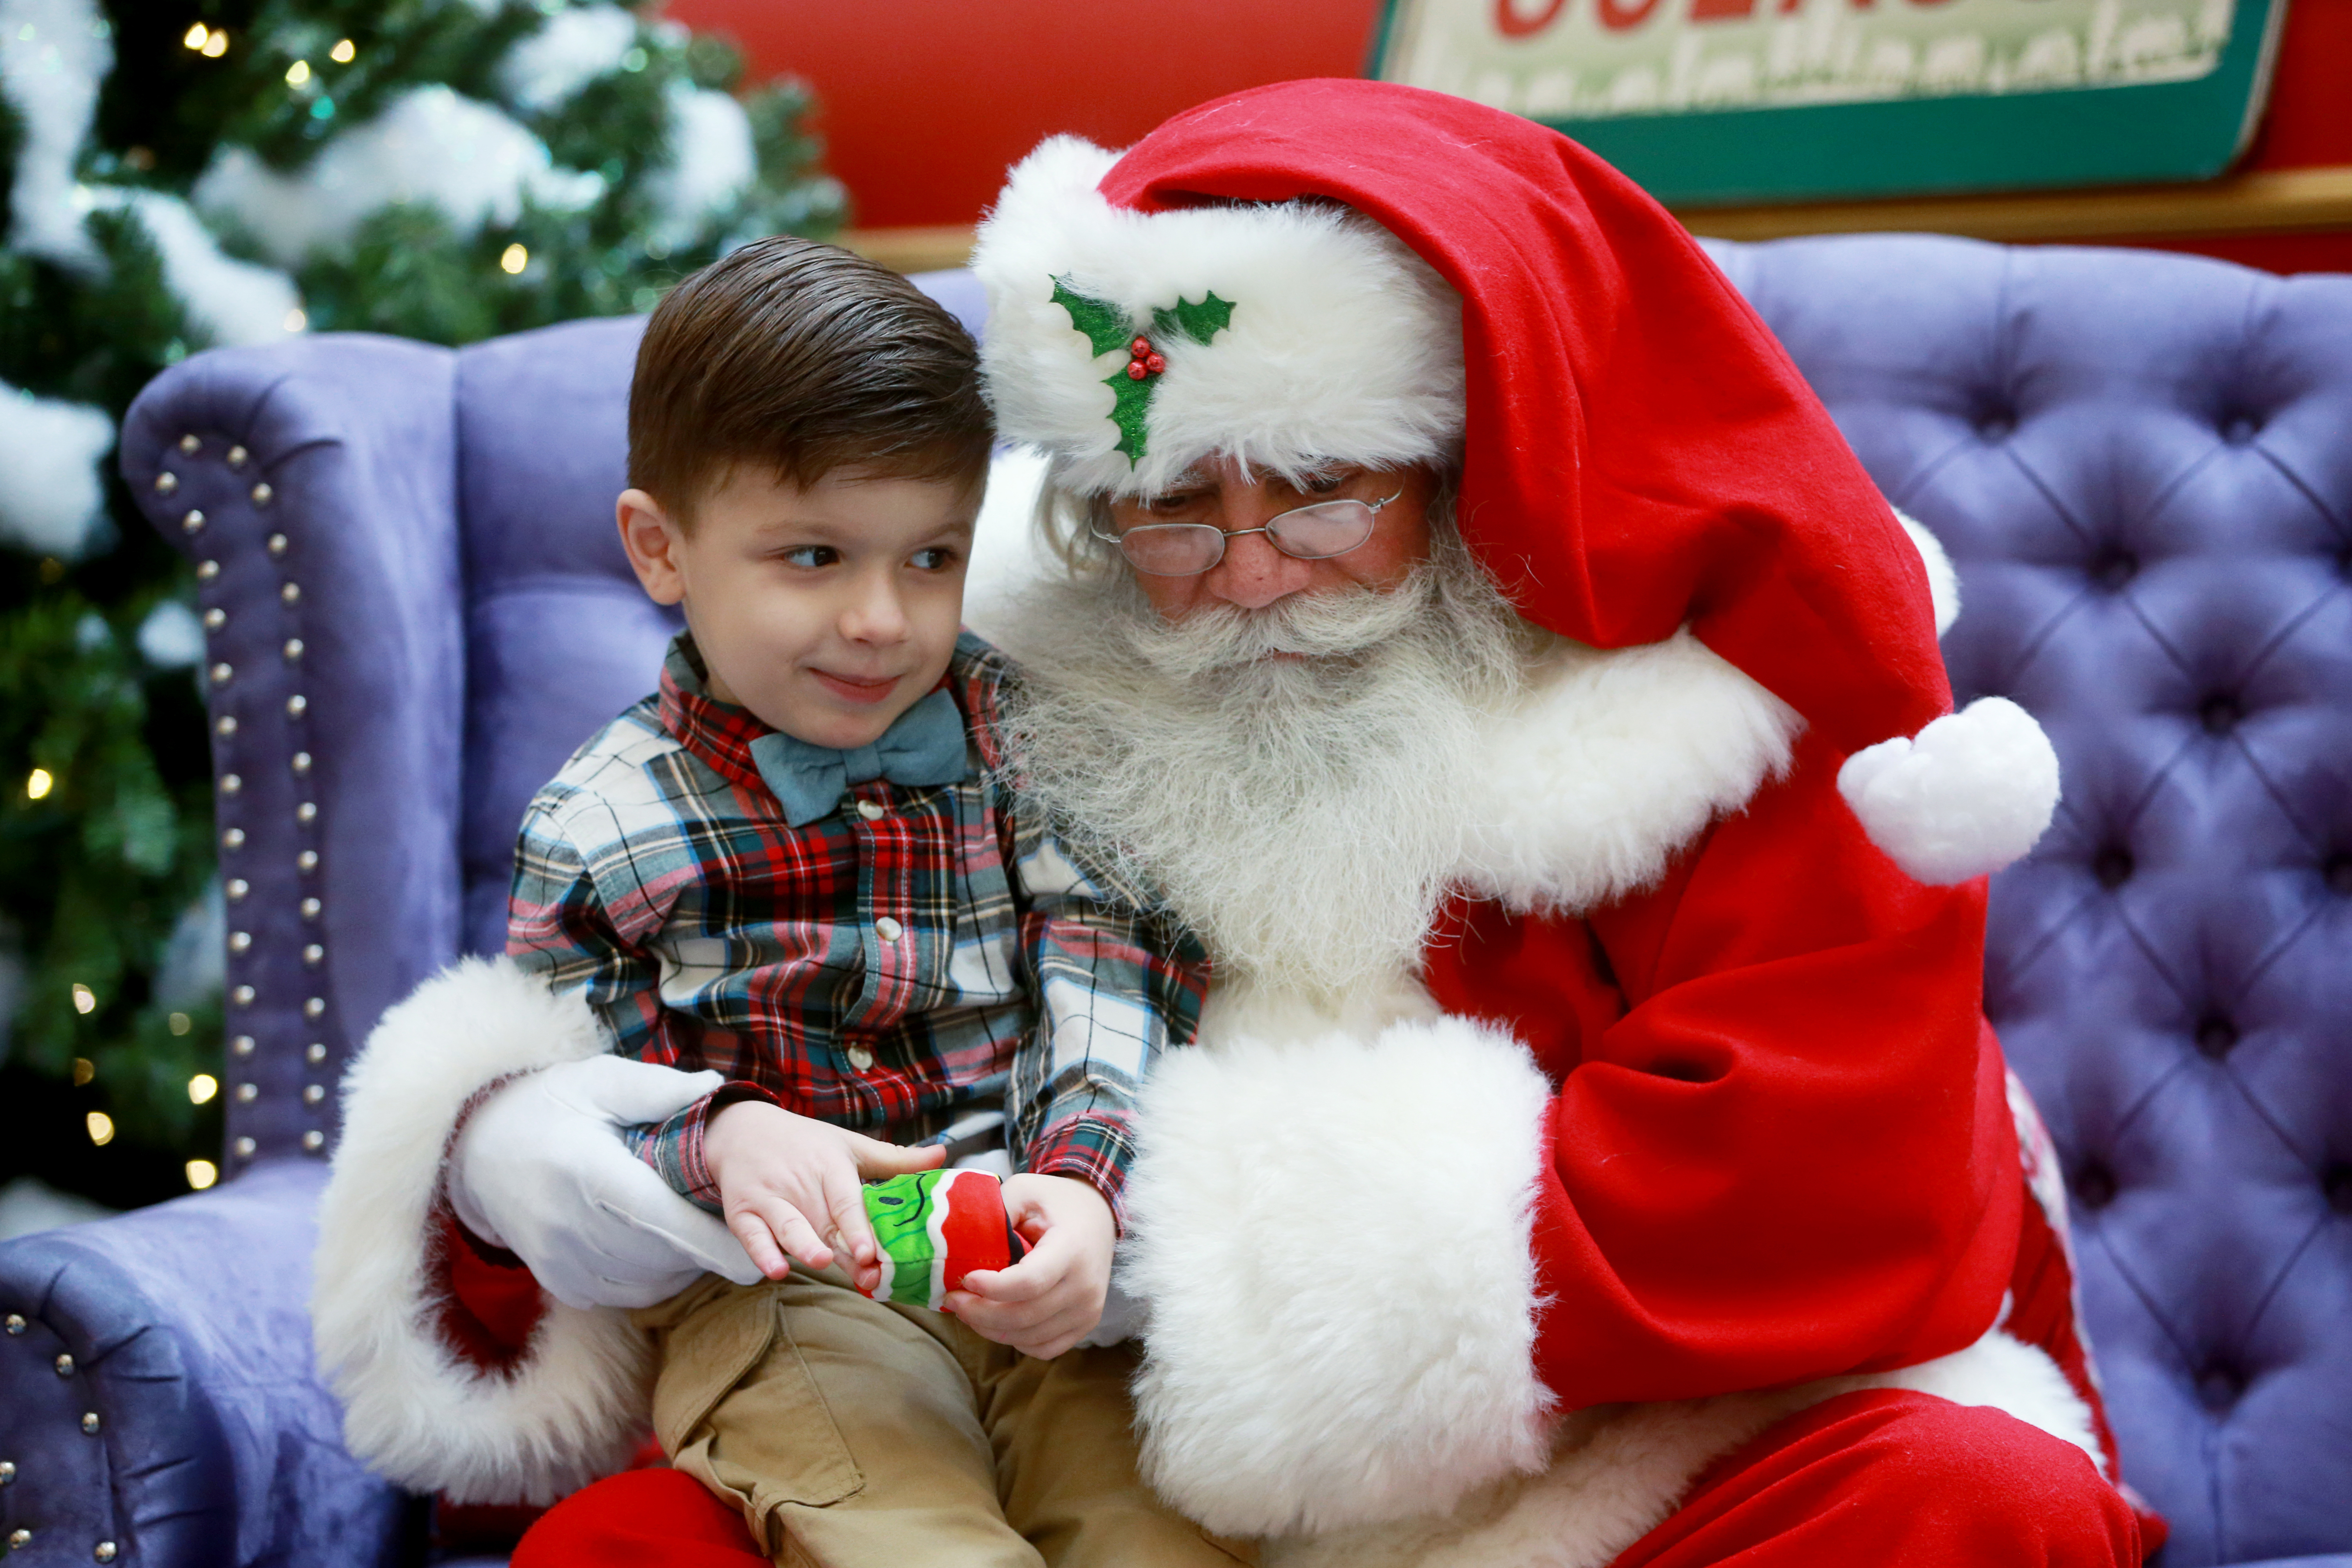 DBusiness Daily Update: Somerset Collection Welcomes Santa to His